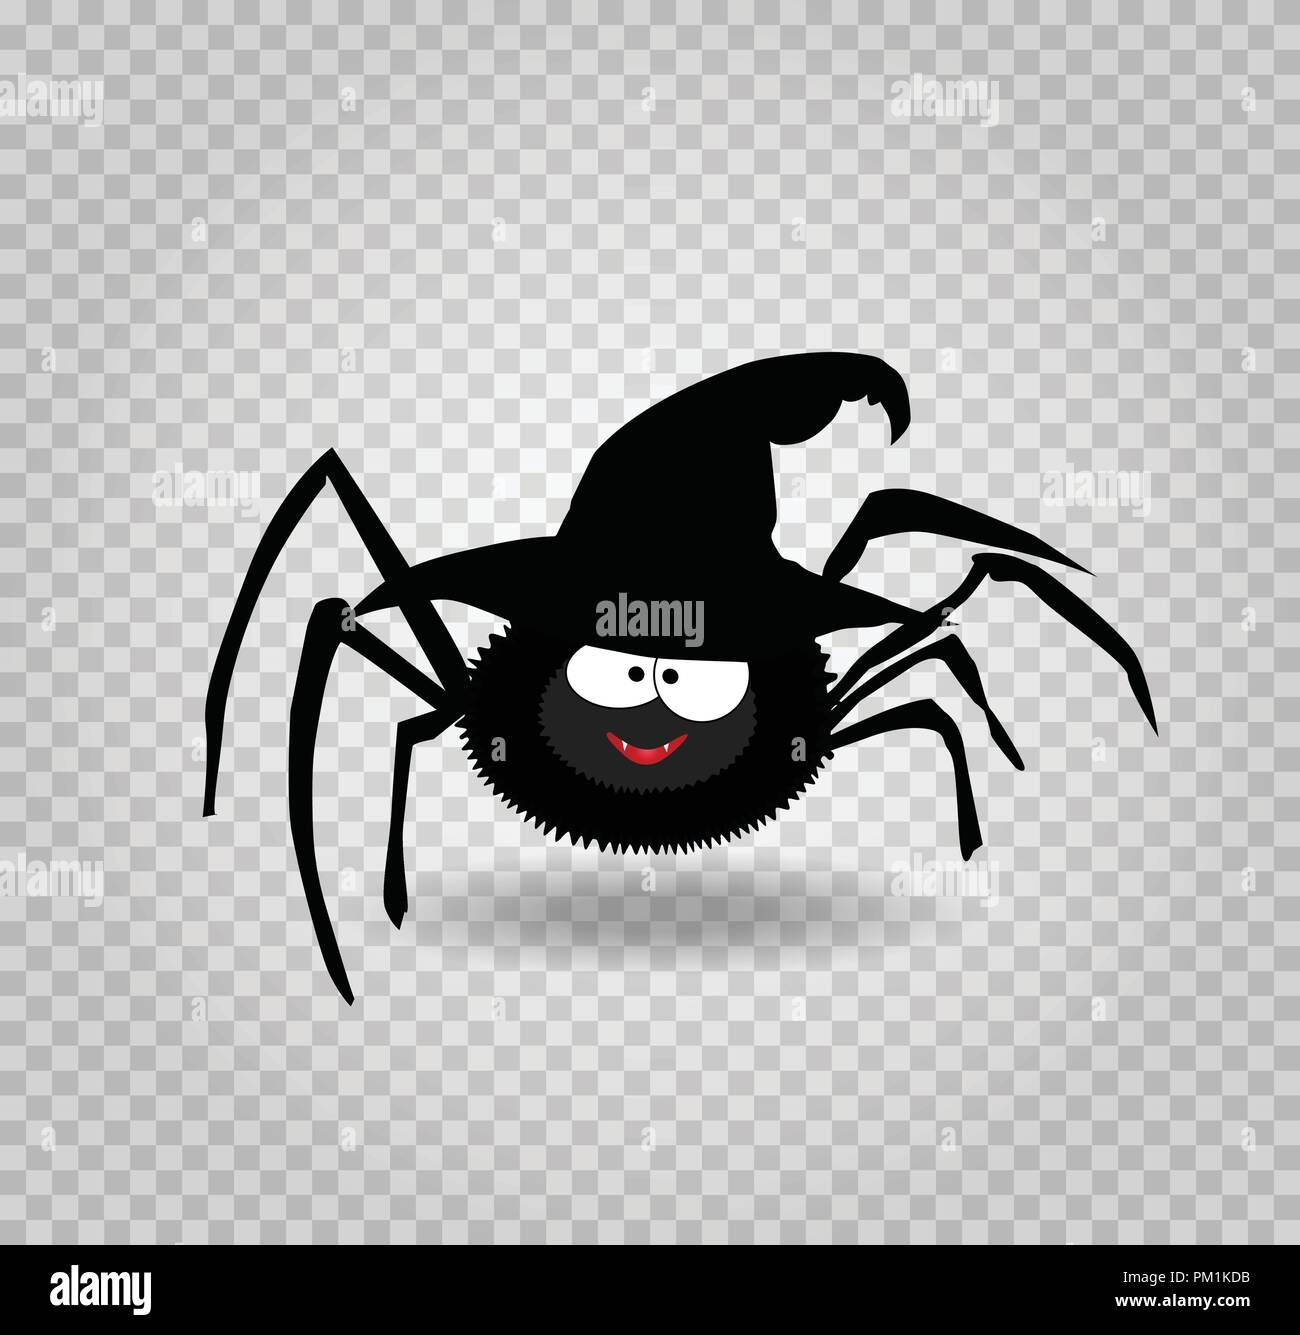 Vector Illustration Of Cute Funny Black Smiling Spider Wearing Halloween Witch Hat Cartoon Spider Character Isolated On Transparent Background Digit Stock Vector Image Art Alamy